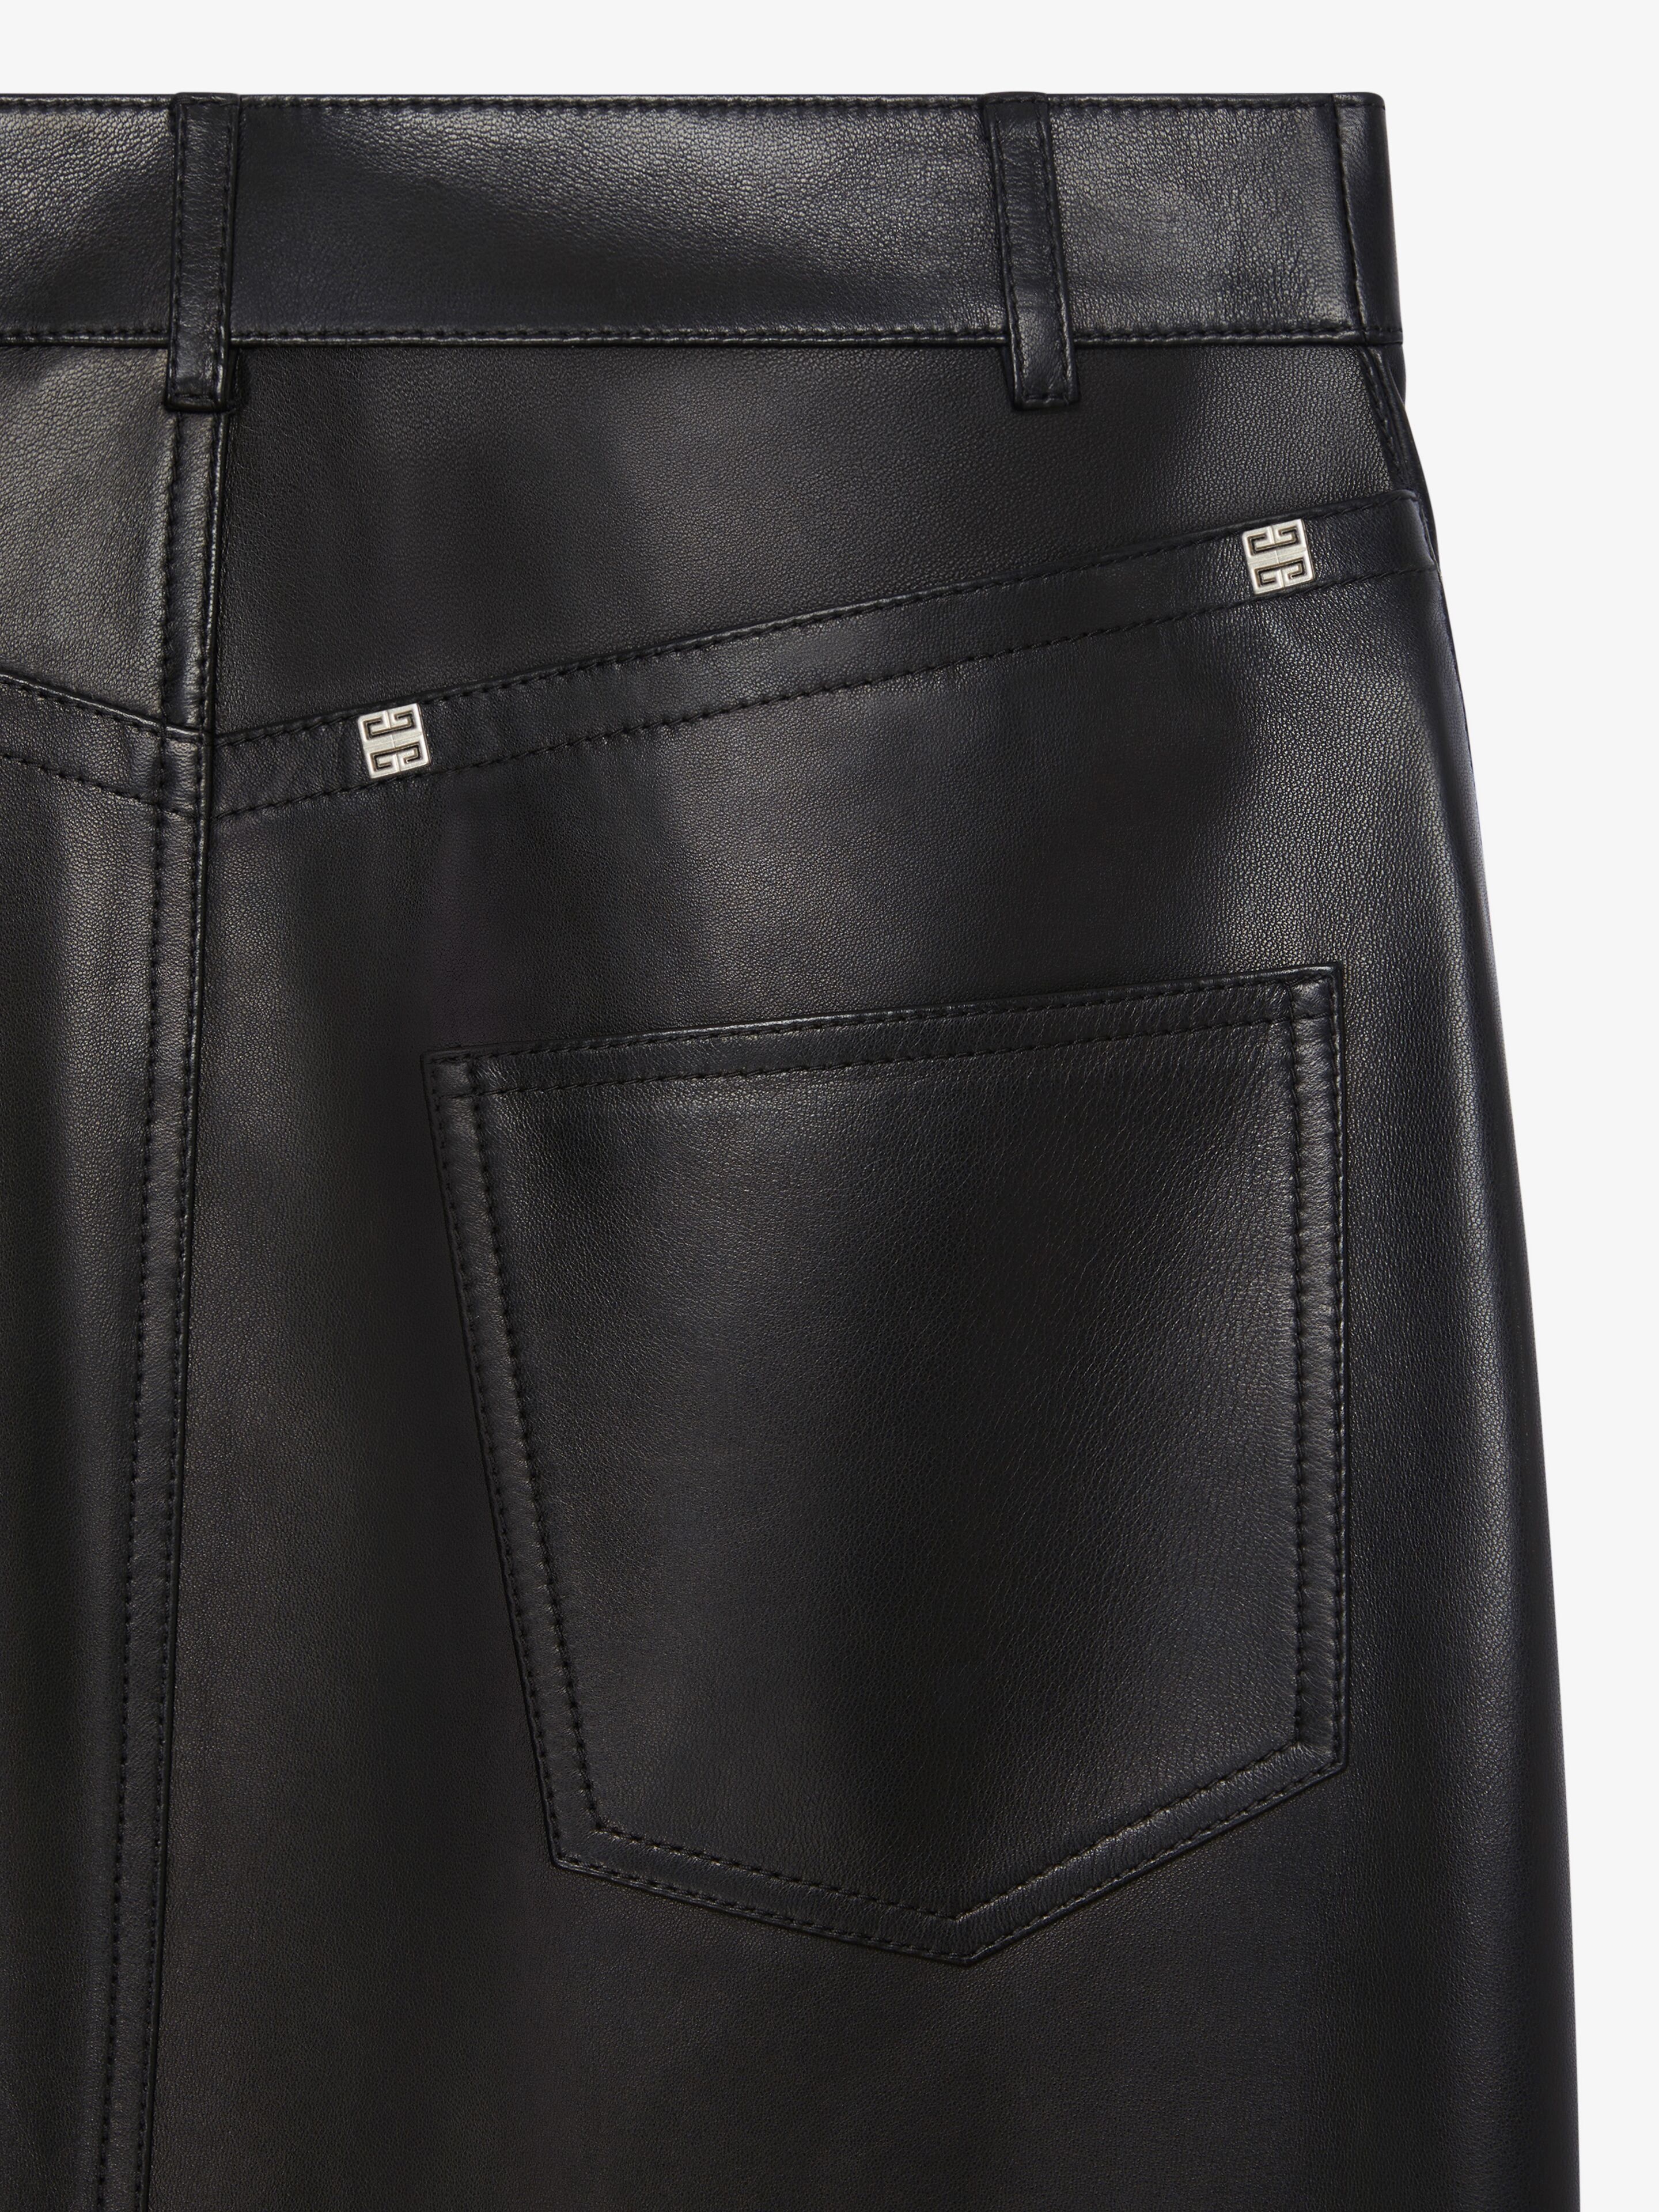 SKIRT IN LEATHER WITH SLIT - 5